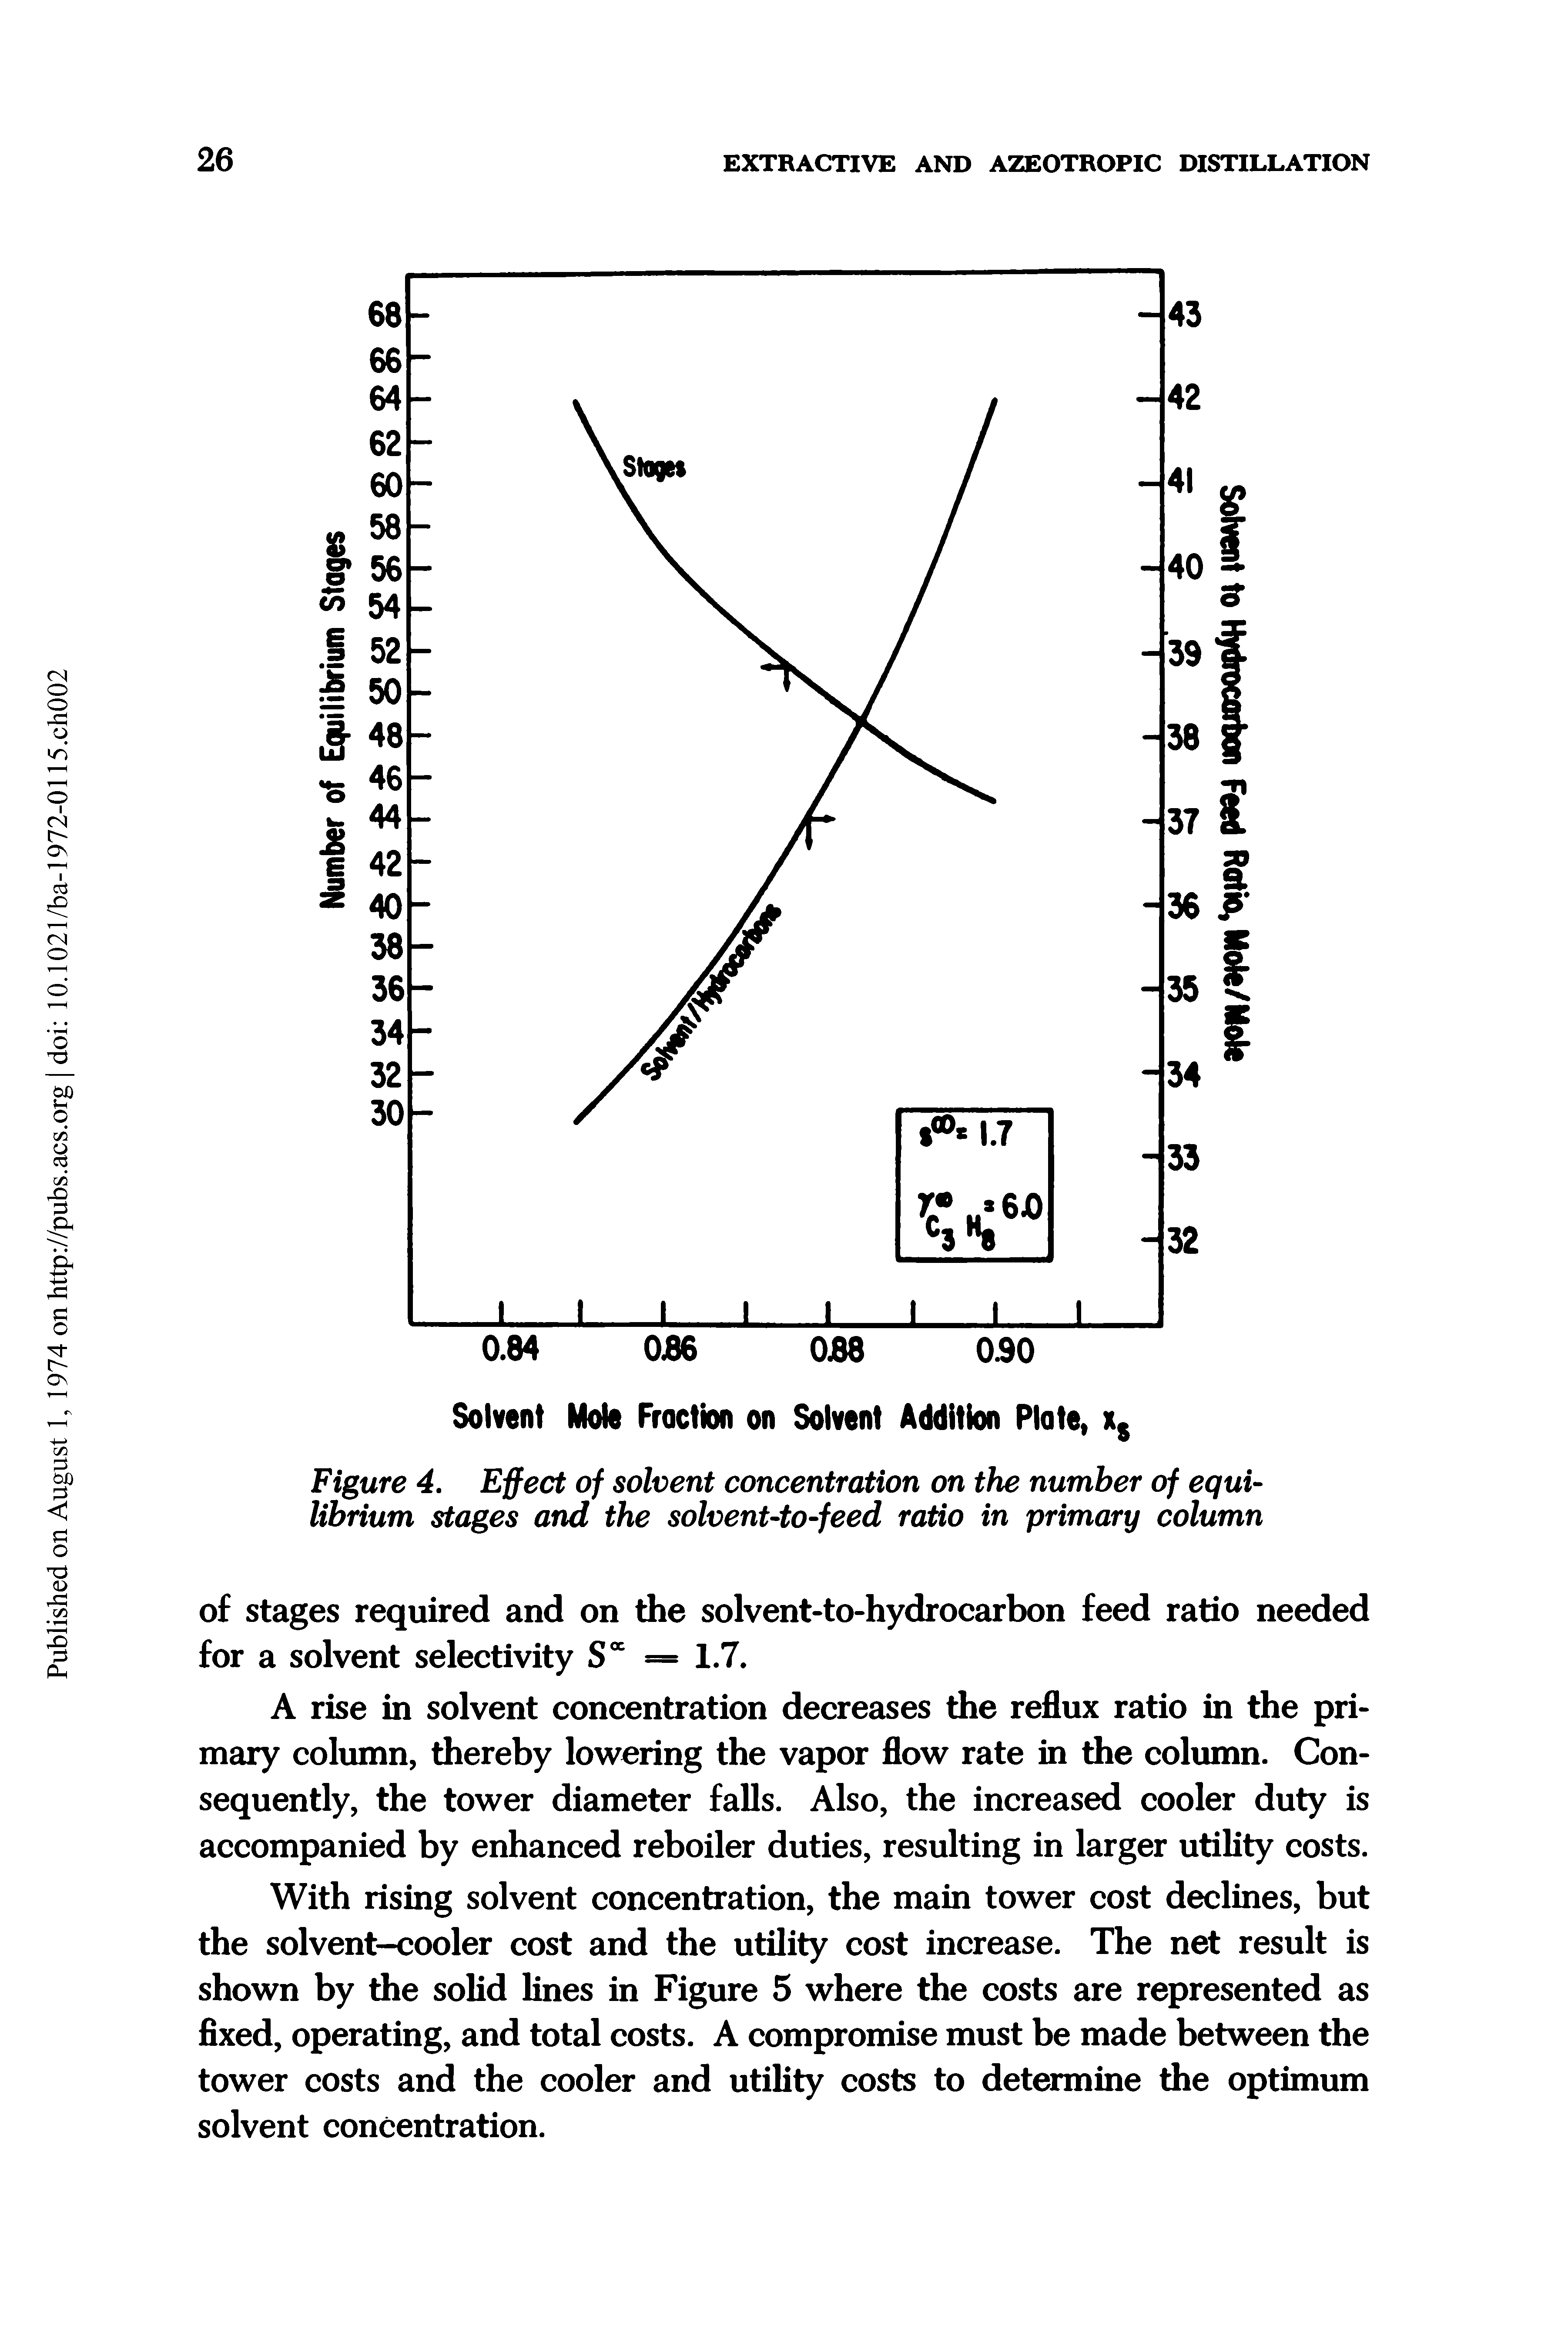 Figure 4. Effect of solvent concentration on the number of equilibrium stages and the solvent-to-feed ratio in primary column...